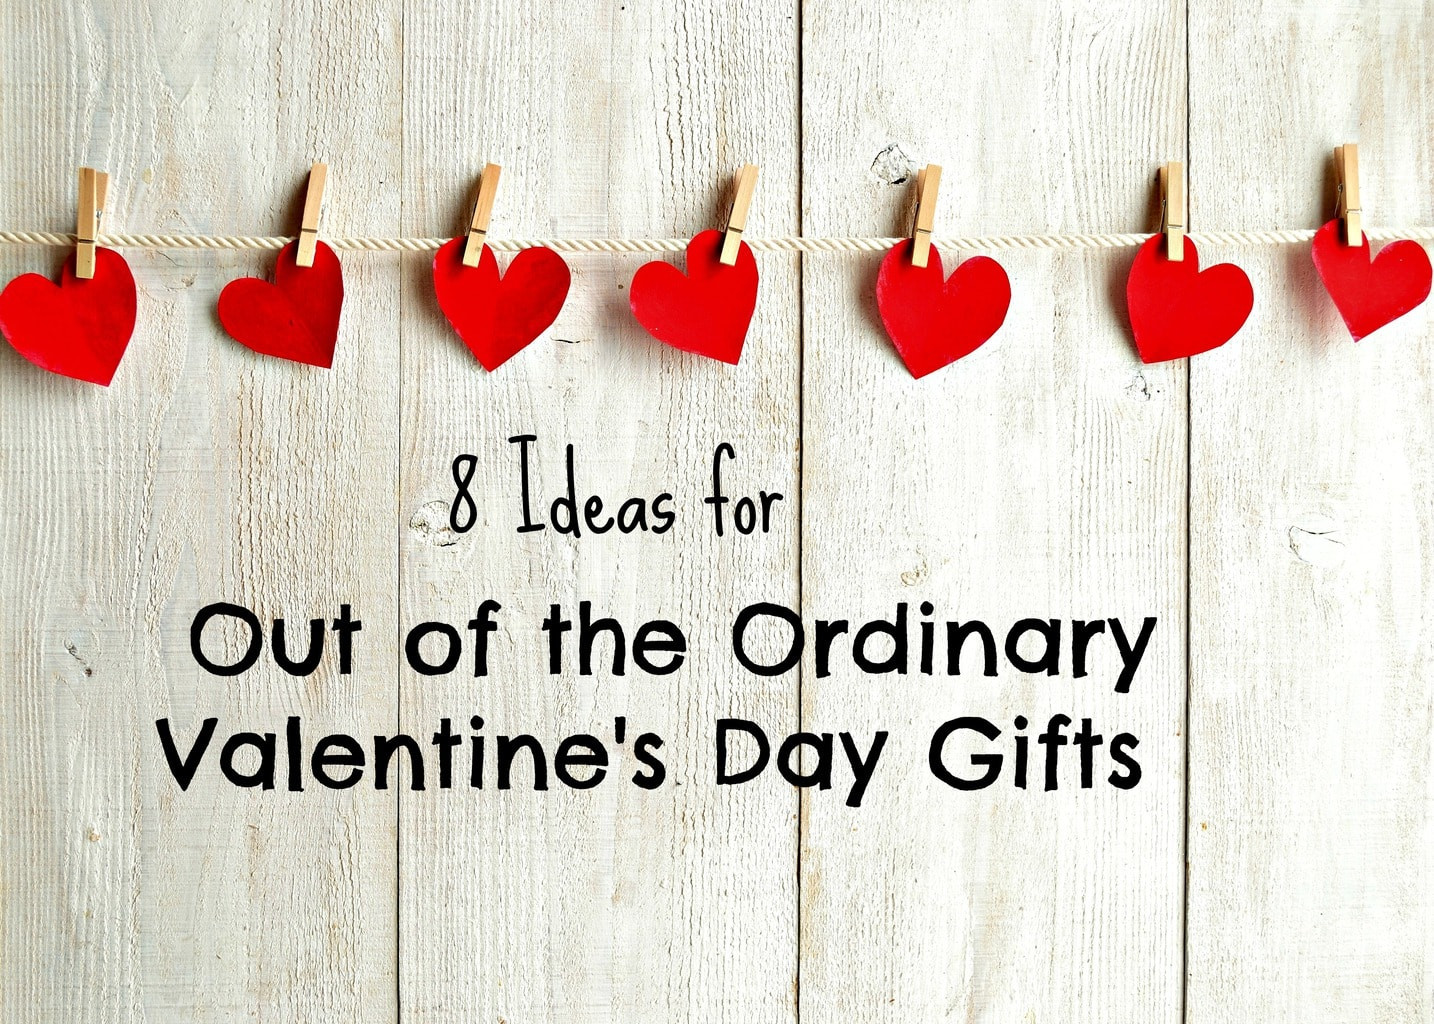 Valentine'S Day Gift Baskets Ideas
 Inexpensive Date Night Ideas for Valentine s Day